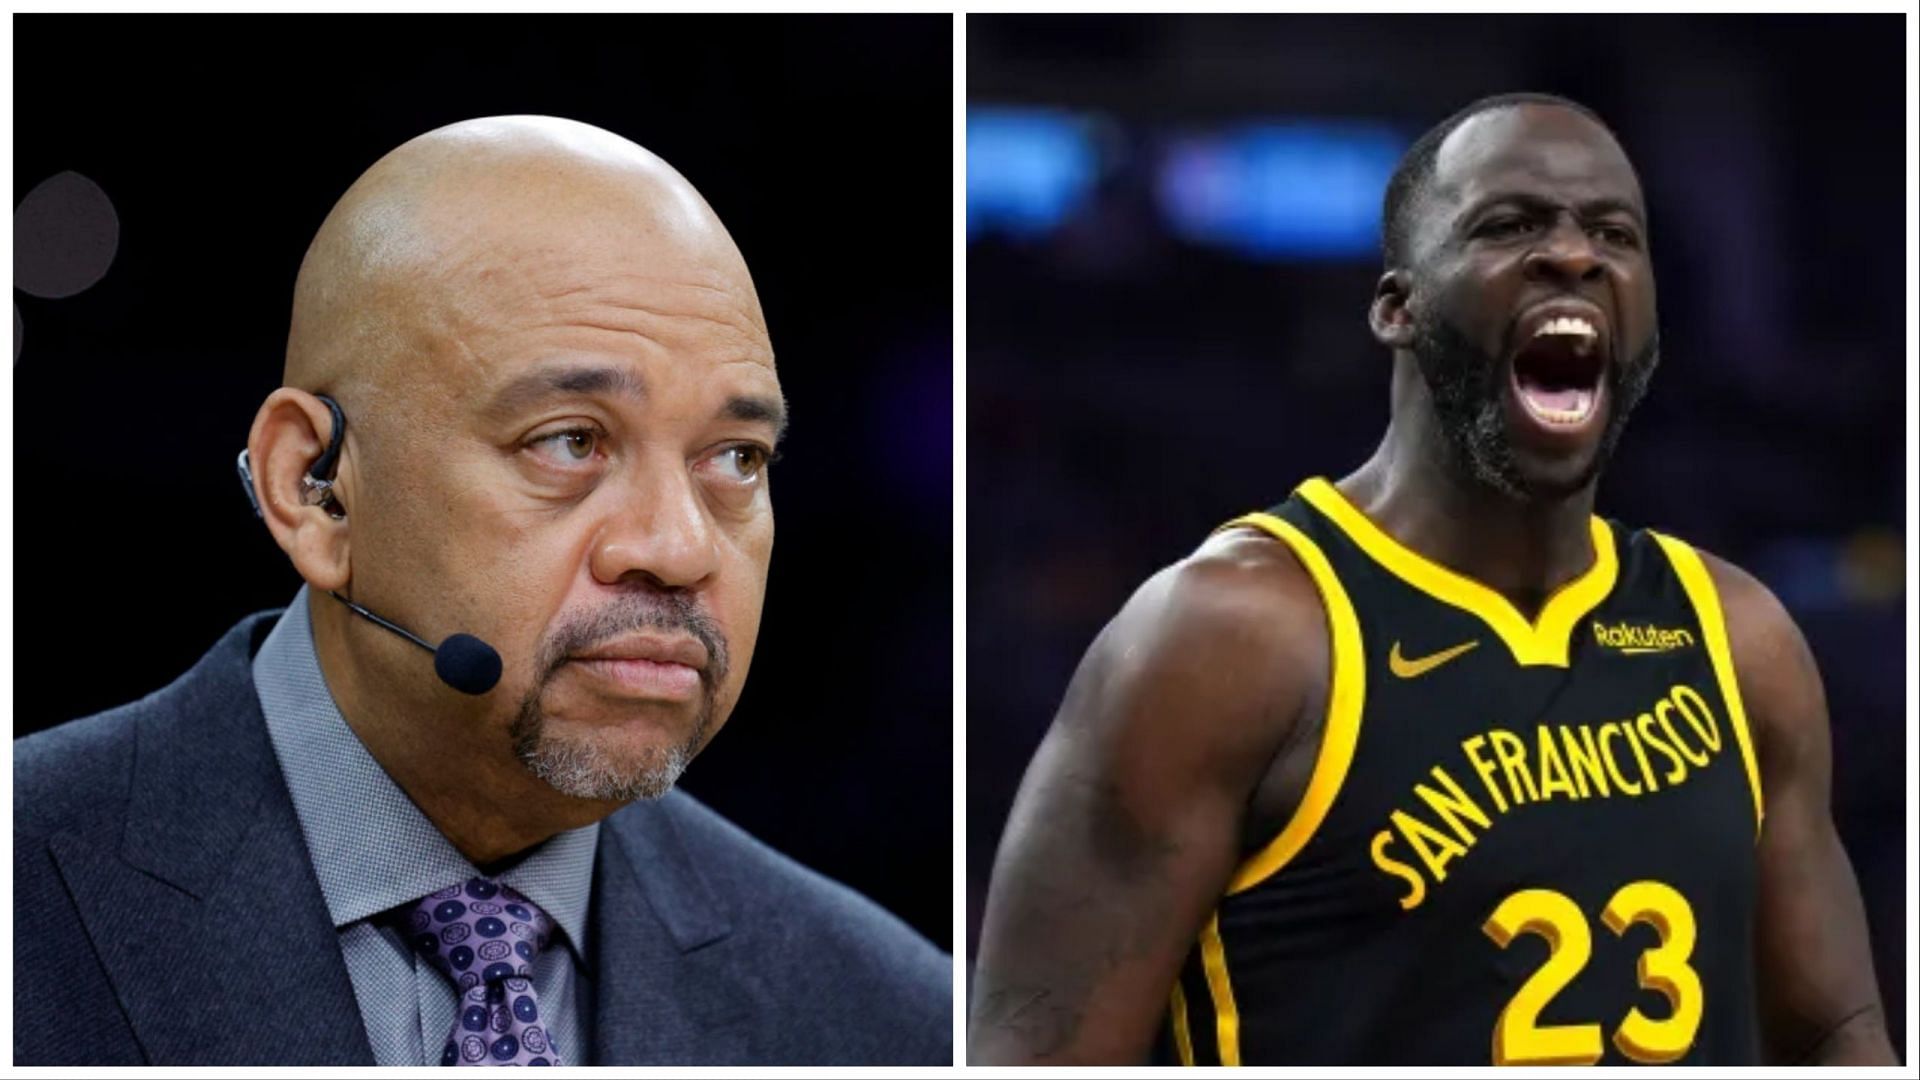 Draymond Green chokeholding Rudy Gobert might get a short term suspension as predicted by Michael Wilbon